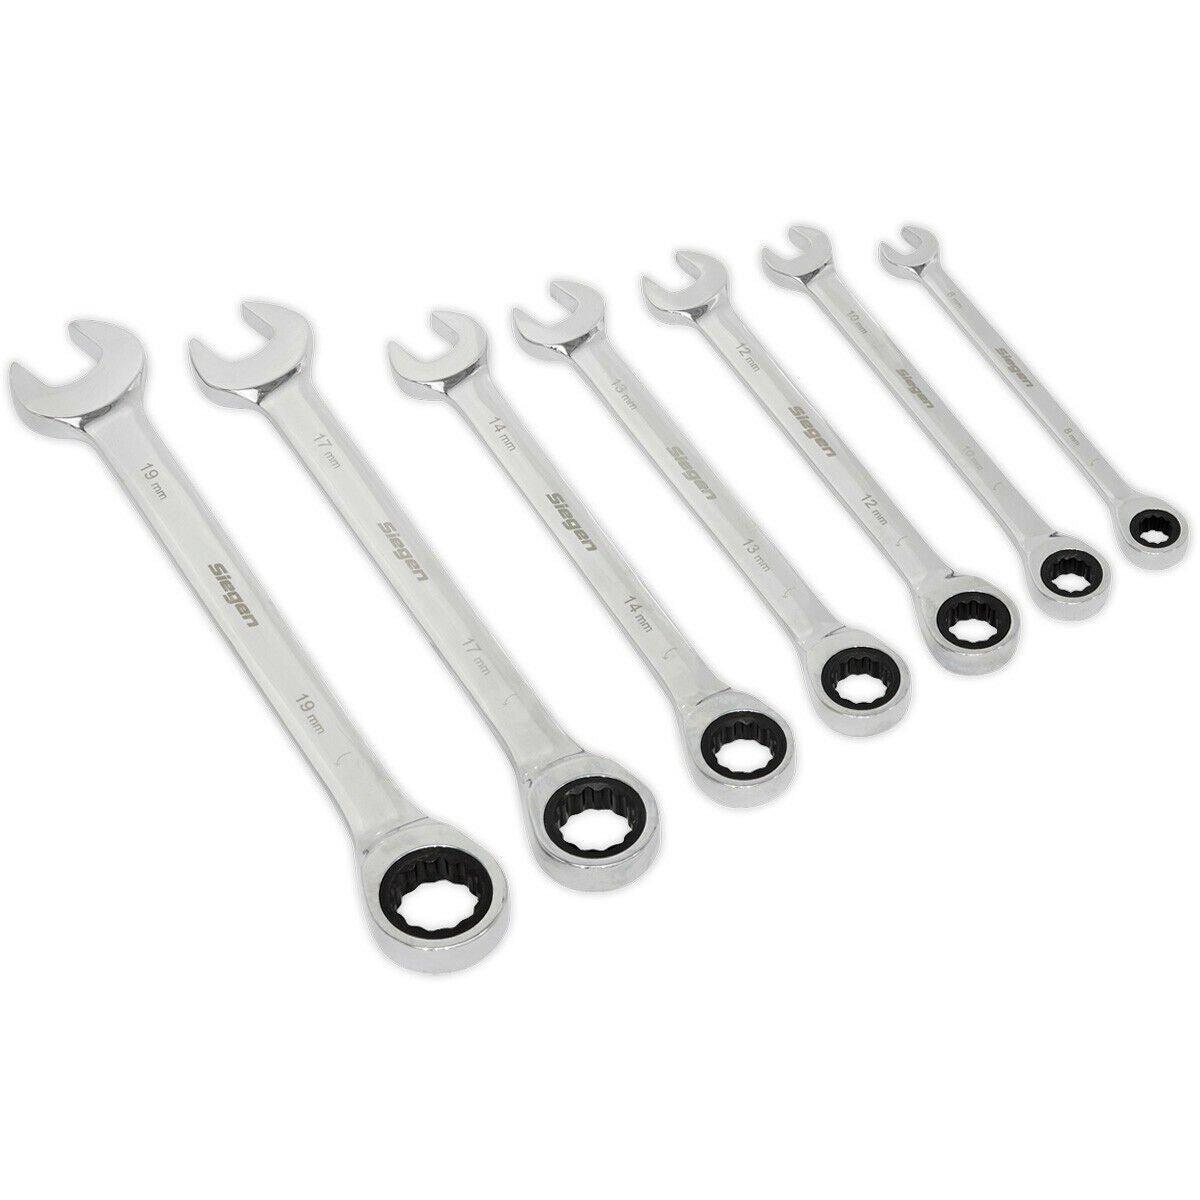 7pc Ratchet Combination Spanner Set - 12 Point Metric Ring Open Head Nut Wrench